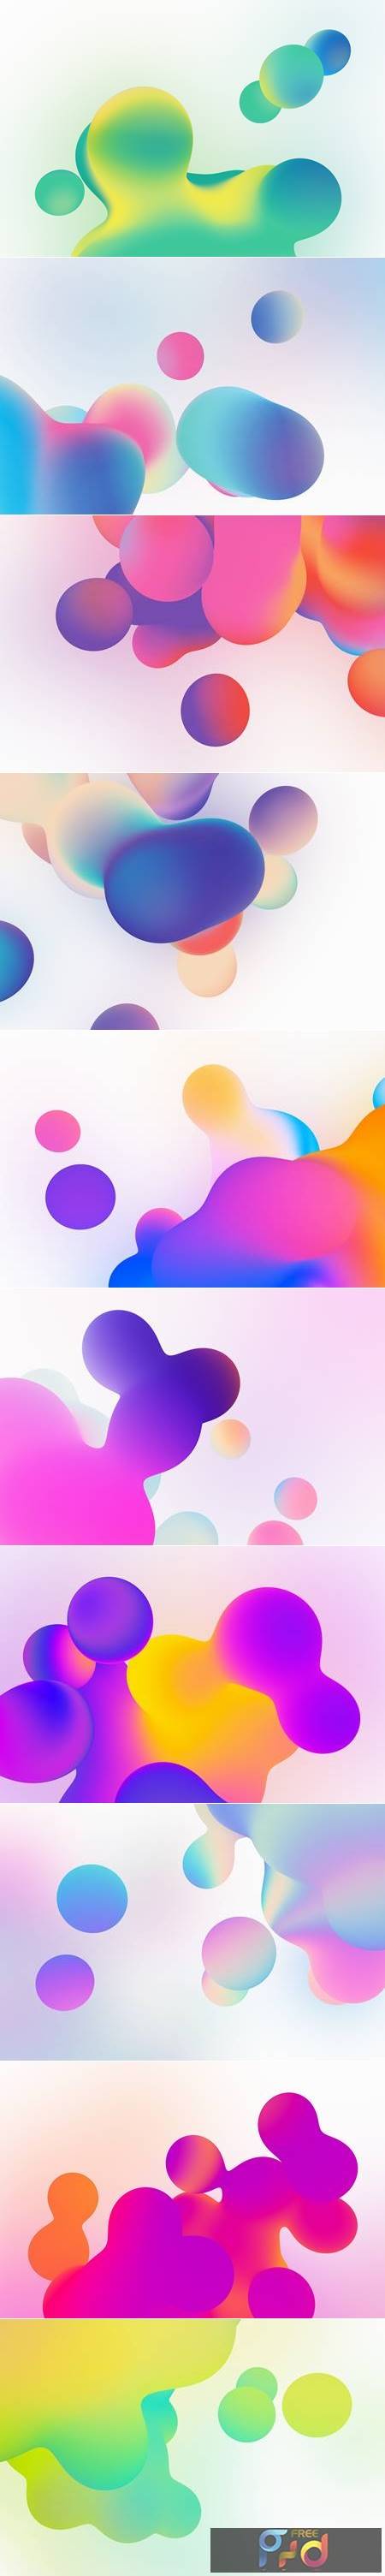 Metaball Holographic Liquid Bubbles Backgrounds H83D8S3 1